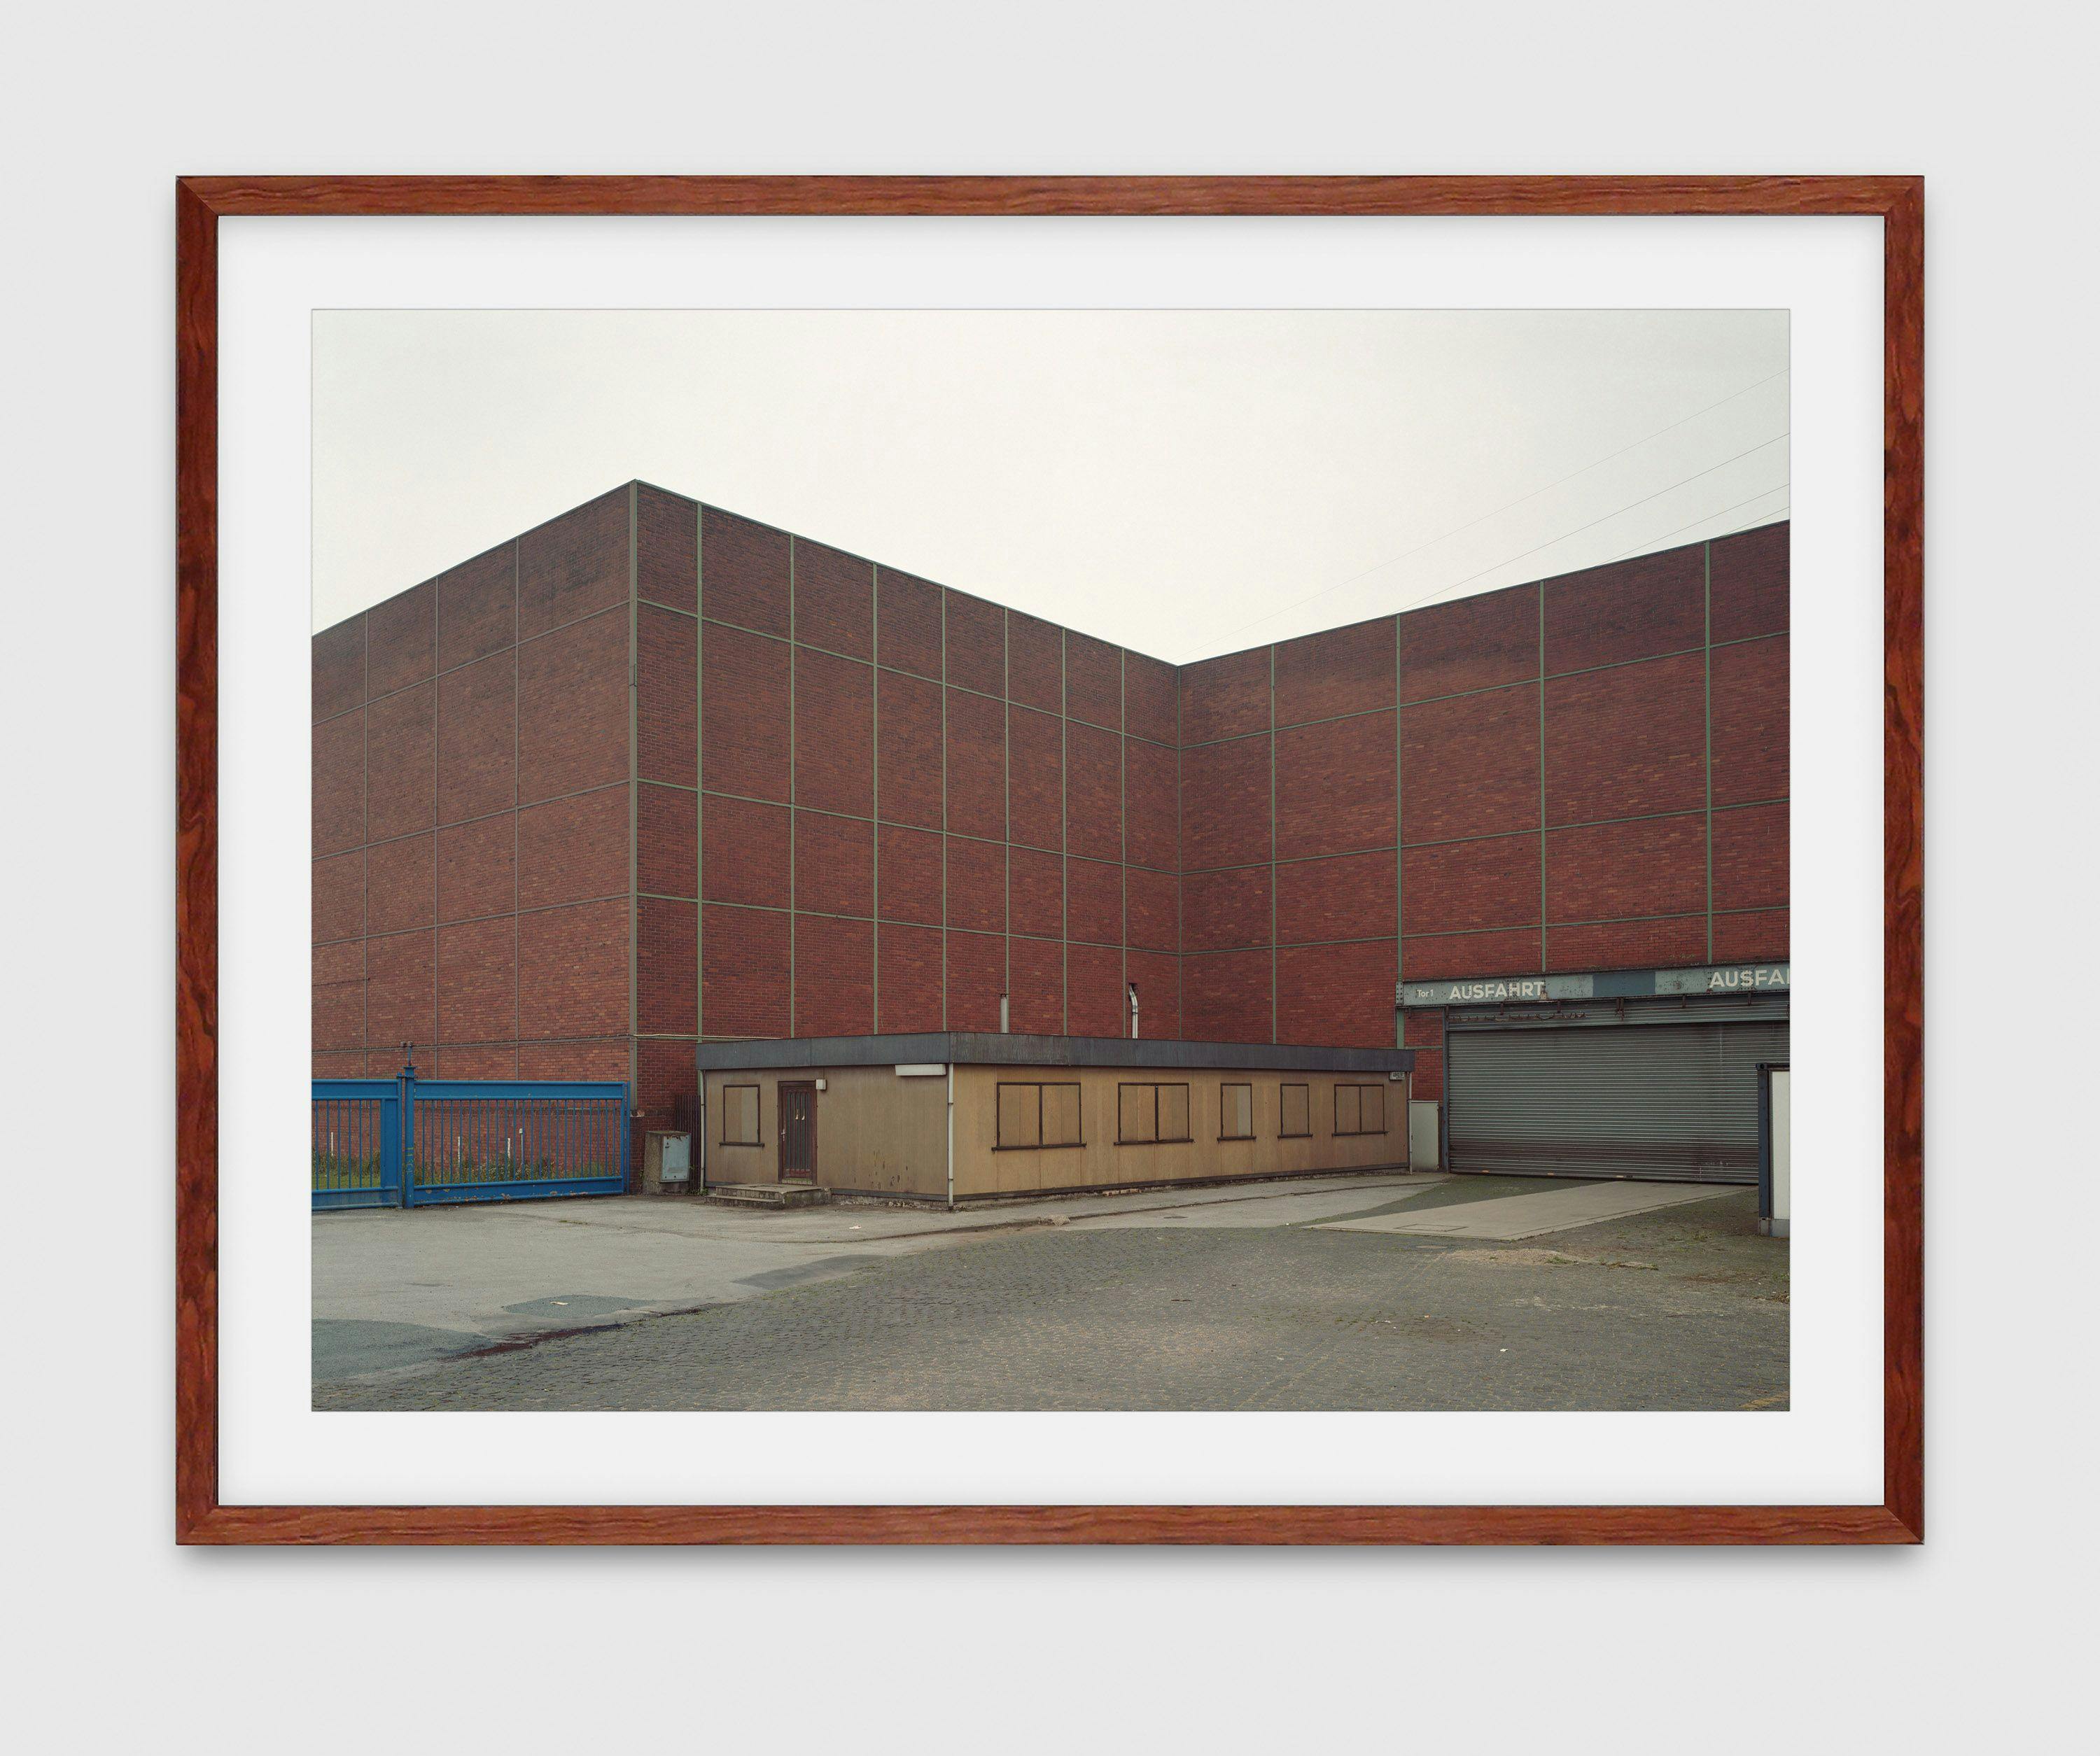 A photograph by Thomas Ruff, titled Haus Nr. 8 III, dated 1988.